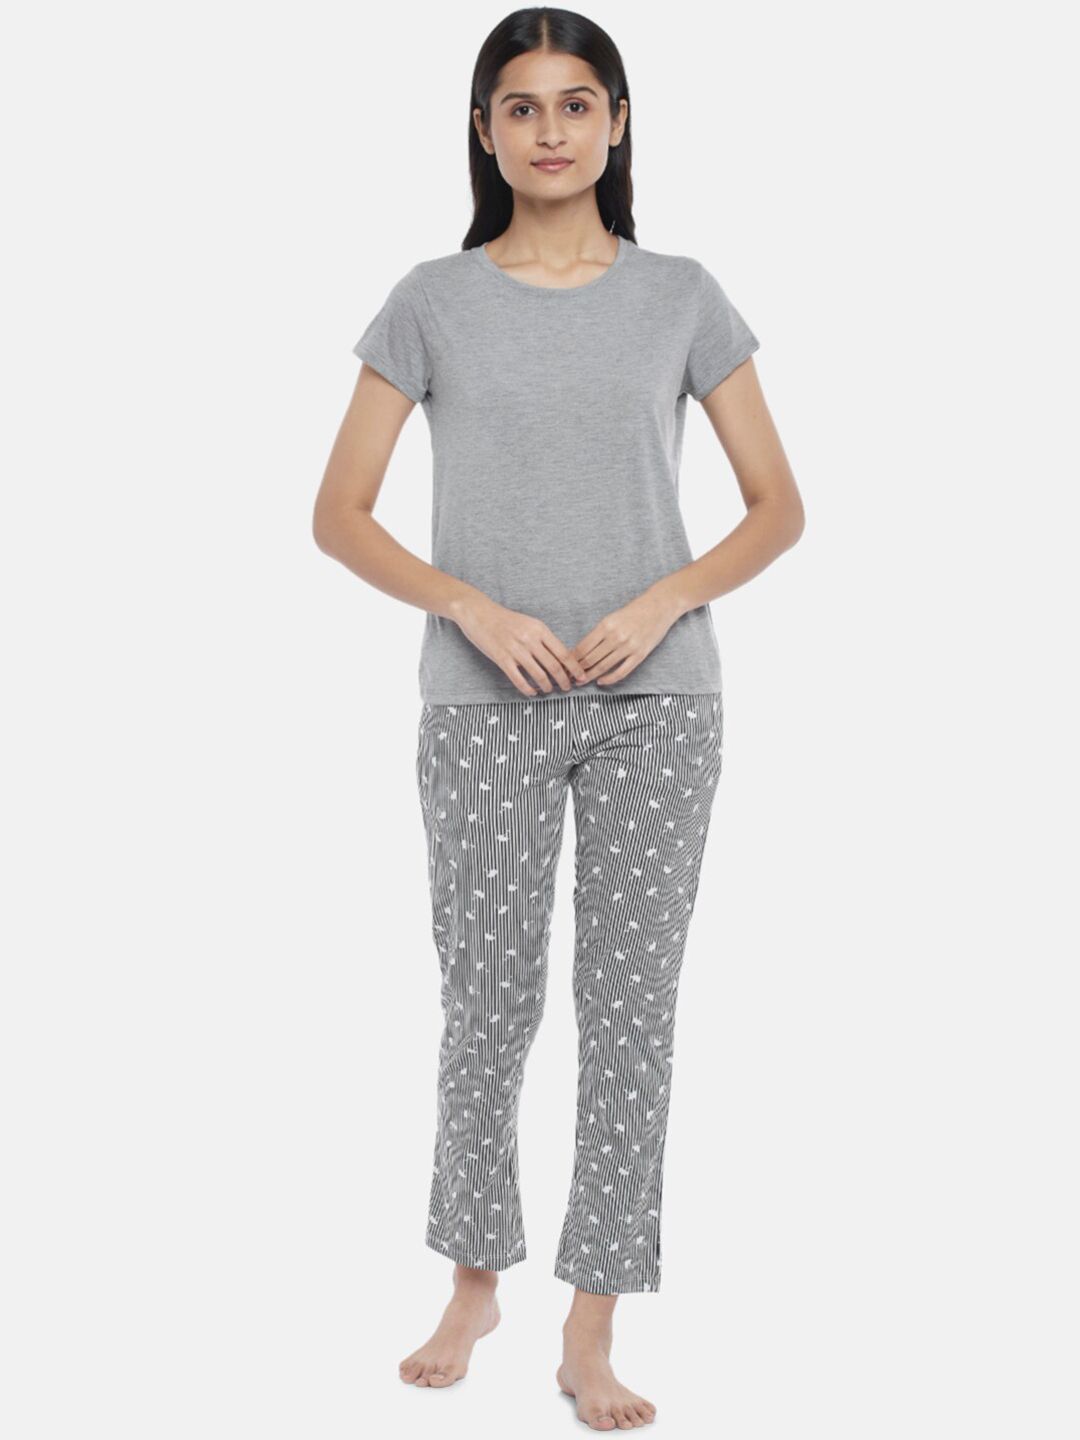 Dreamz by Pantaloons Women Grey & Black Cotton Night suit Price in India